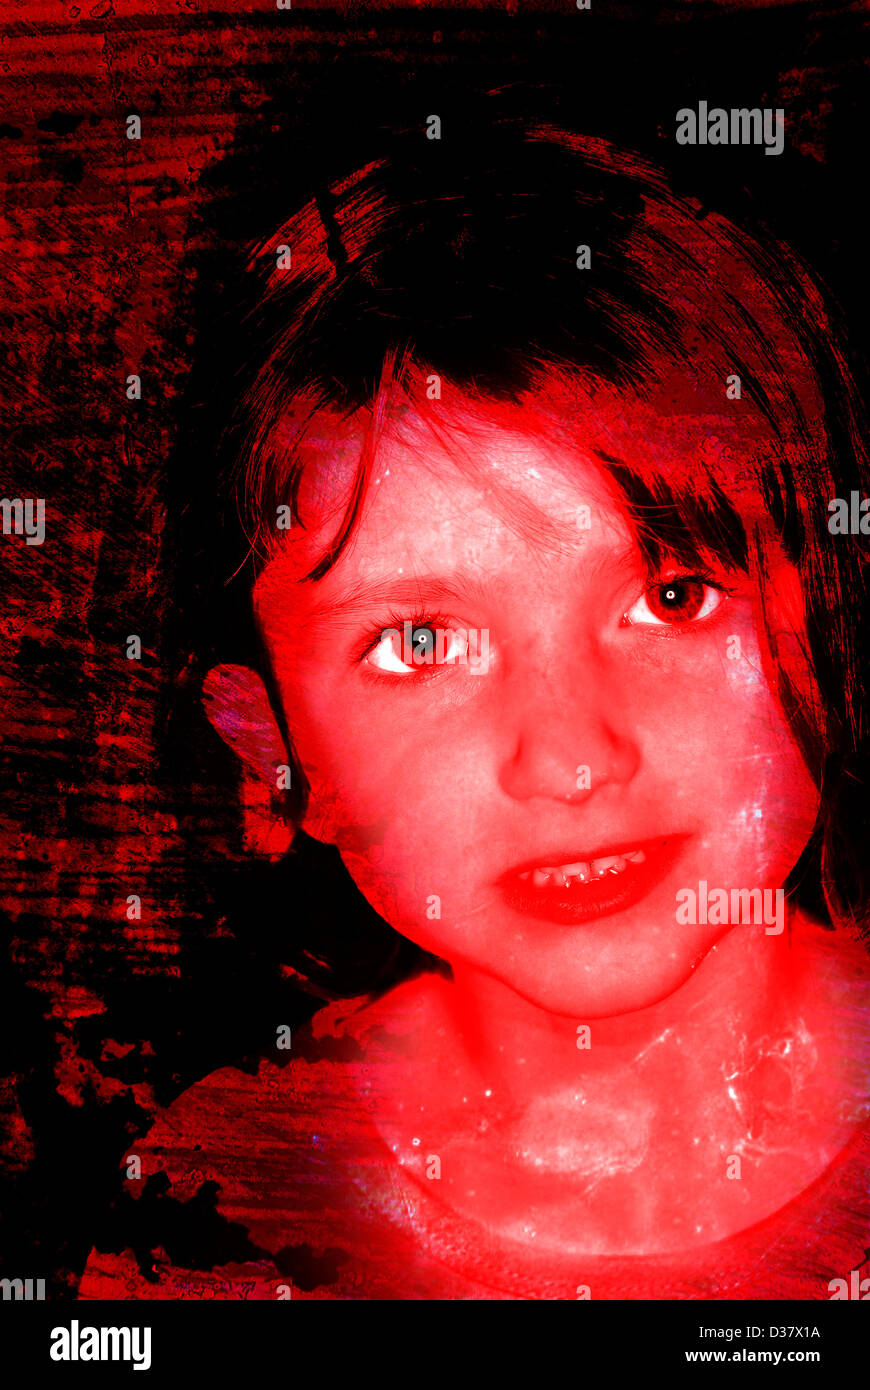 Little girl portrait in red and texture to emphasize art Stock Photo